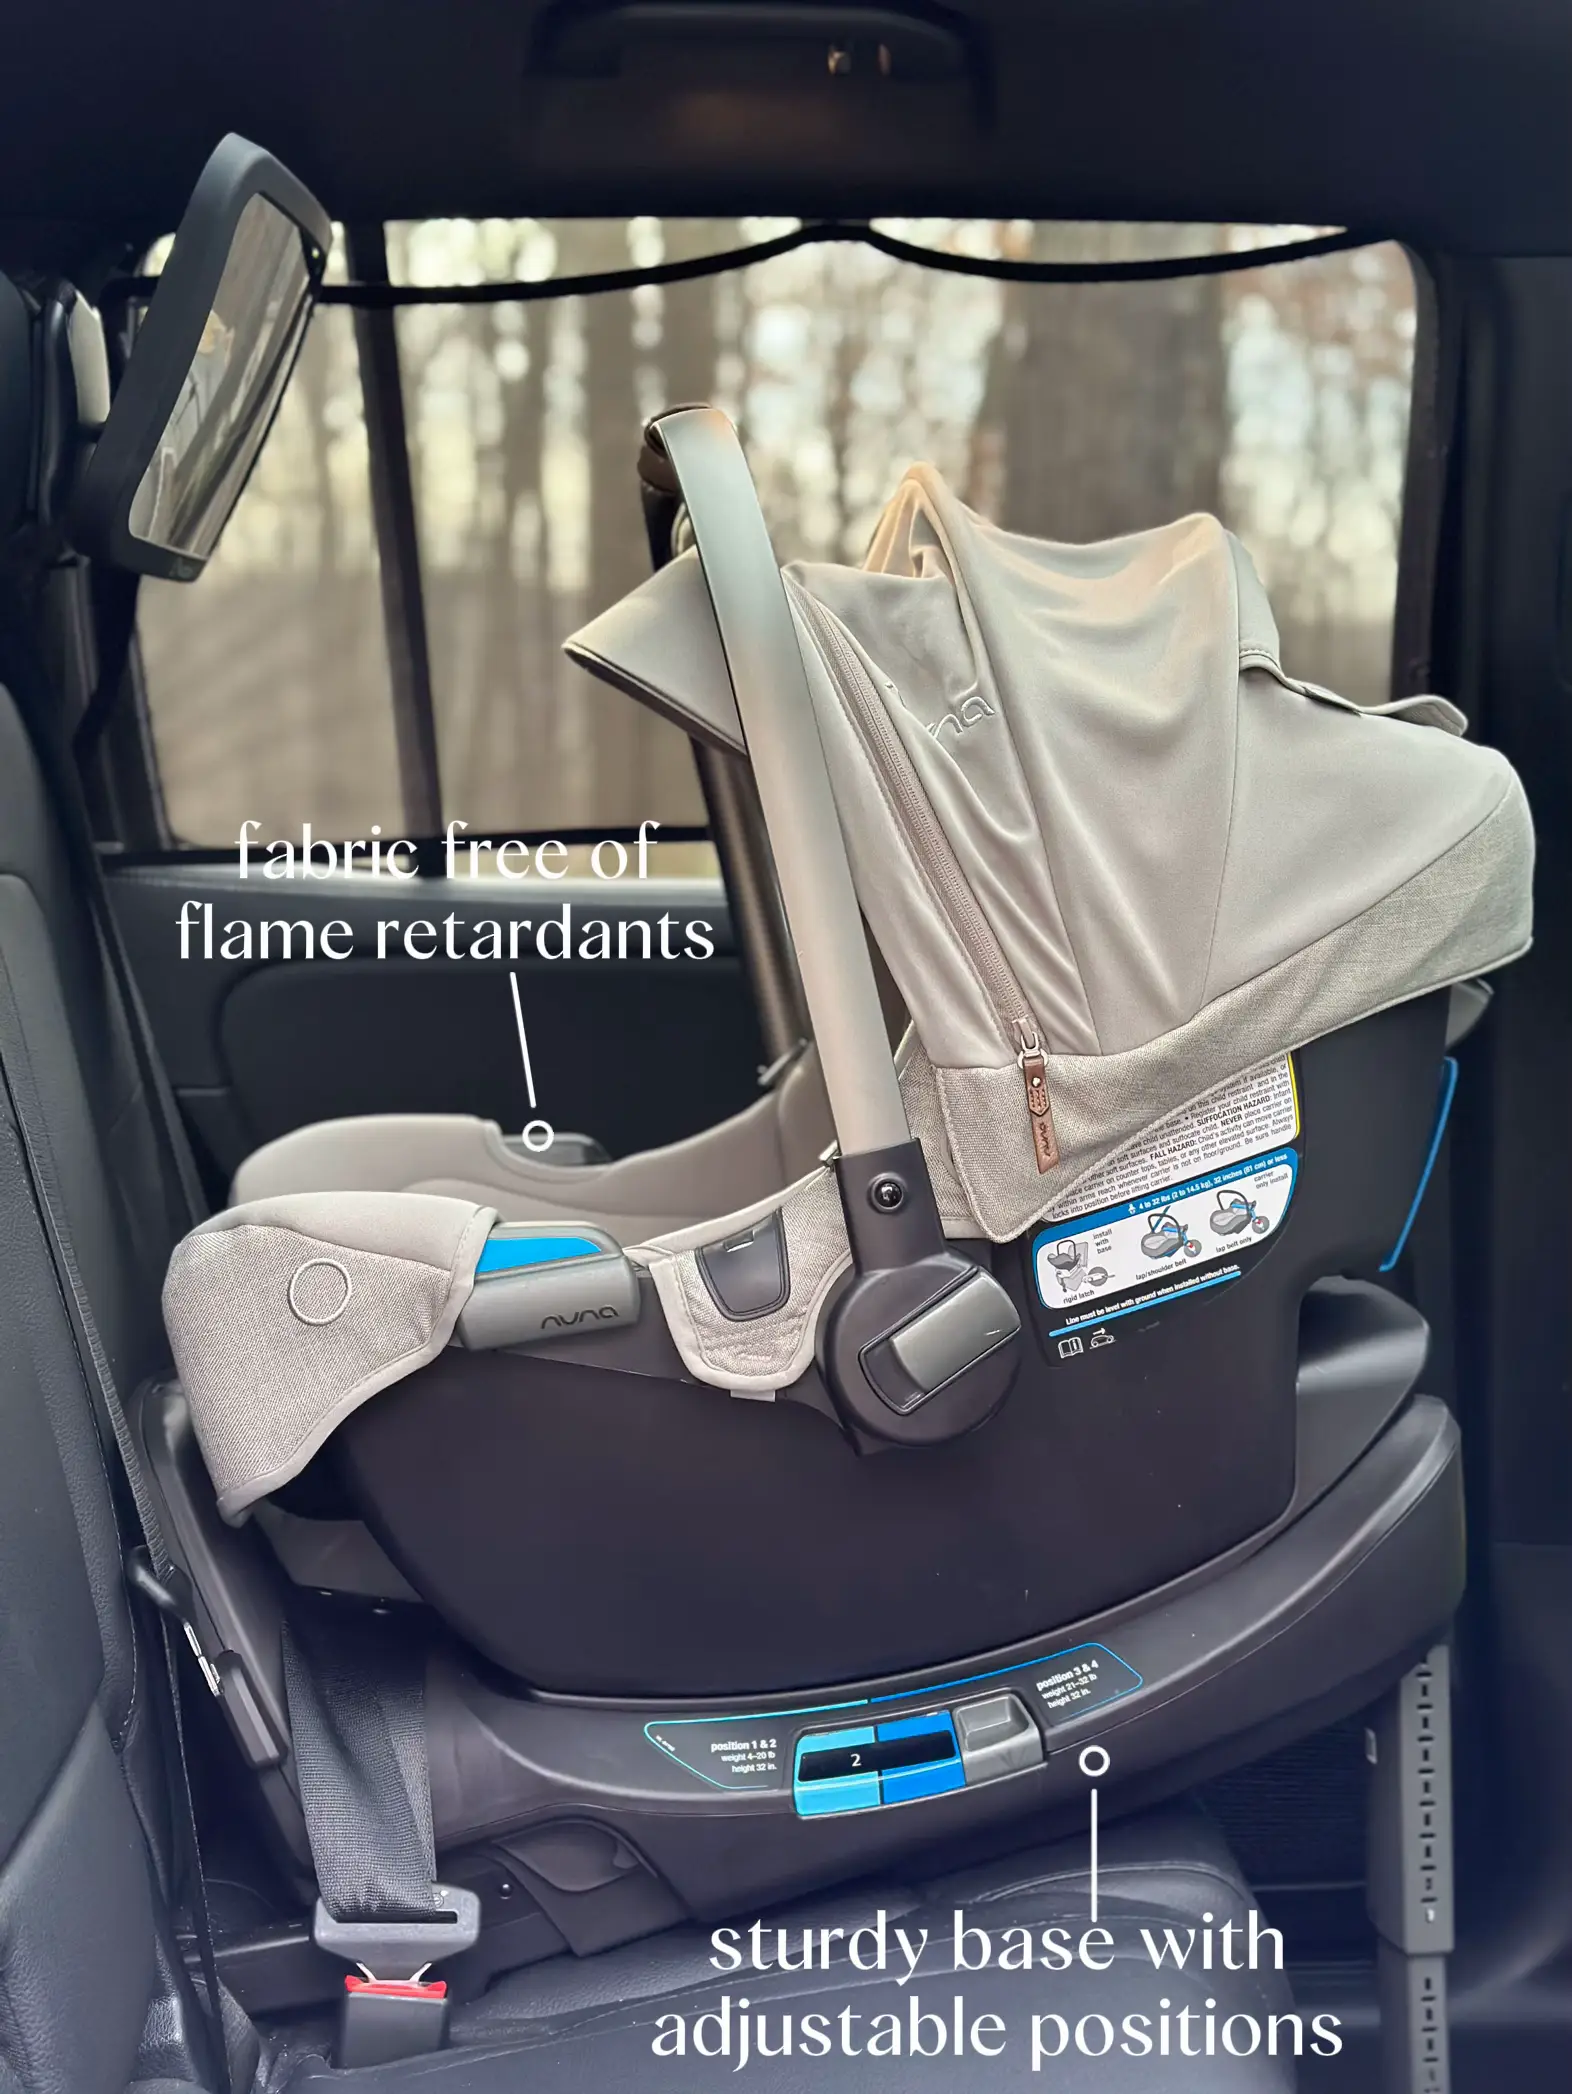  A car seat with a sturdy base and adjustable positions.